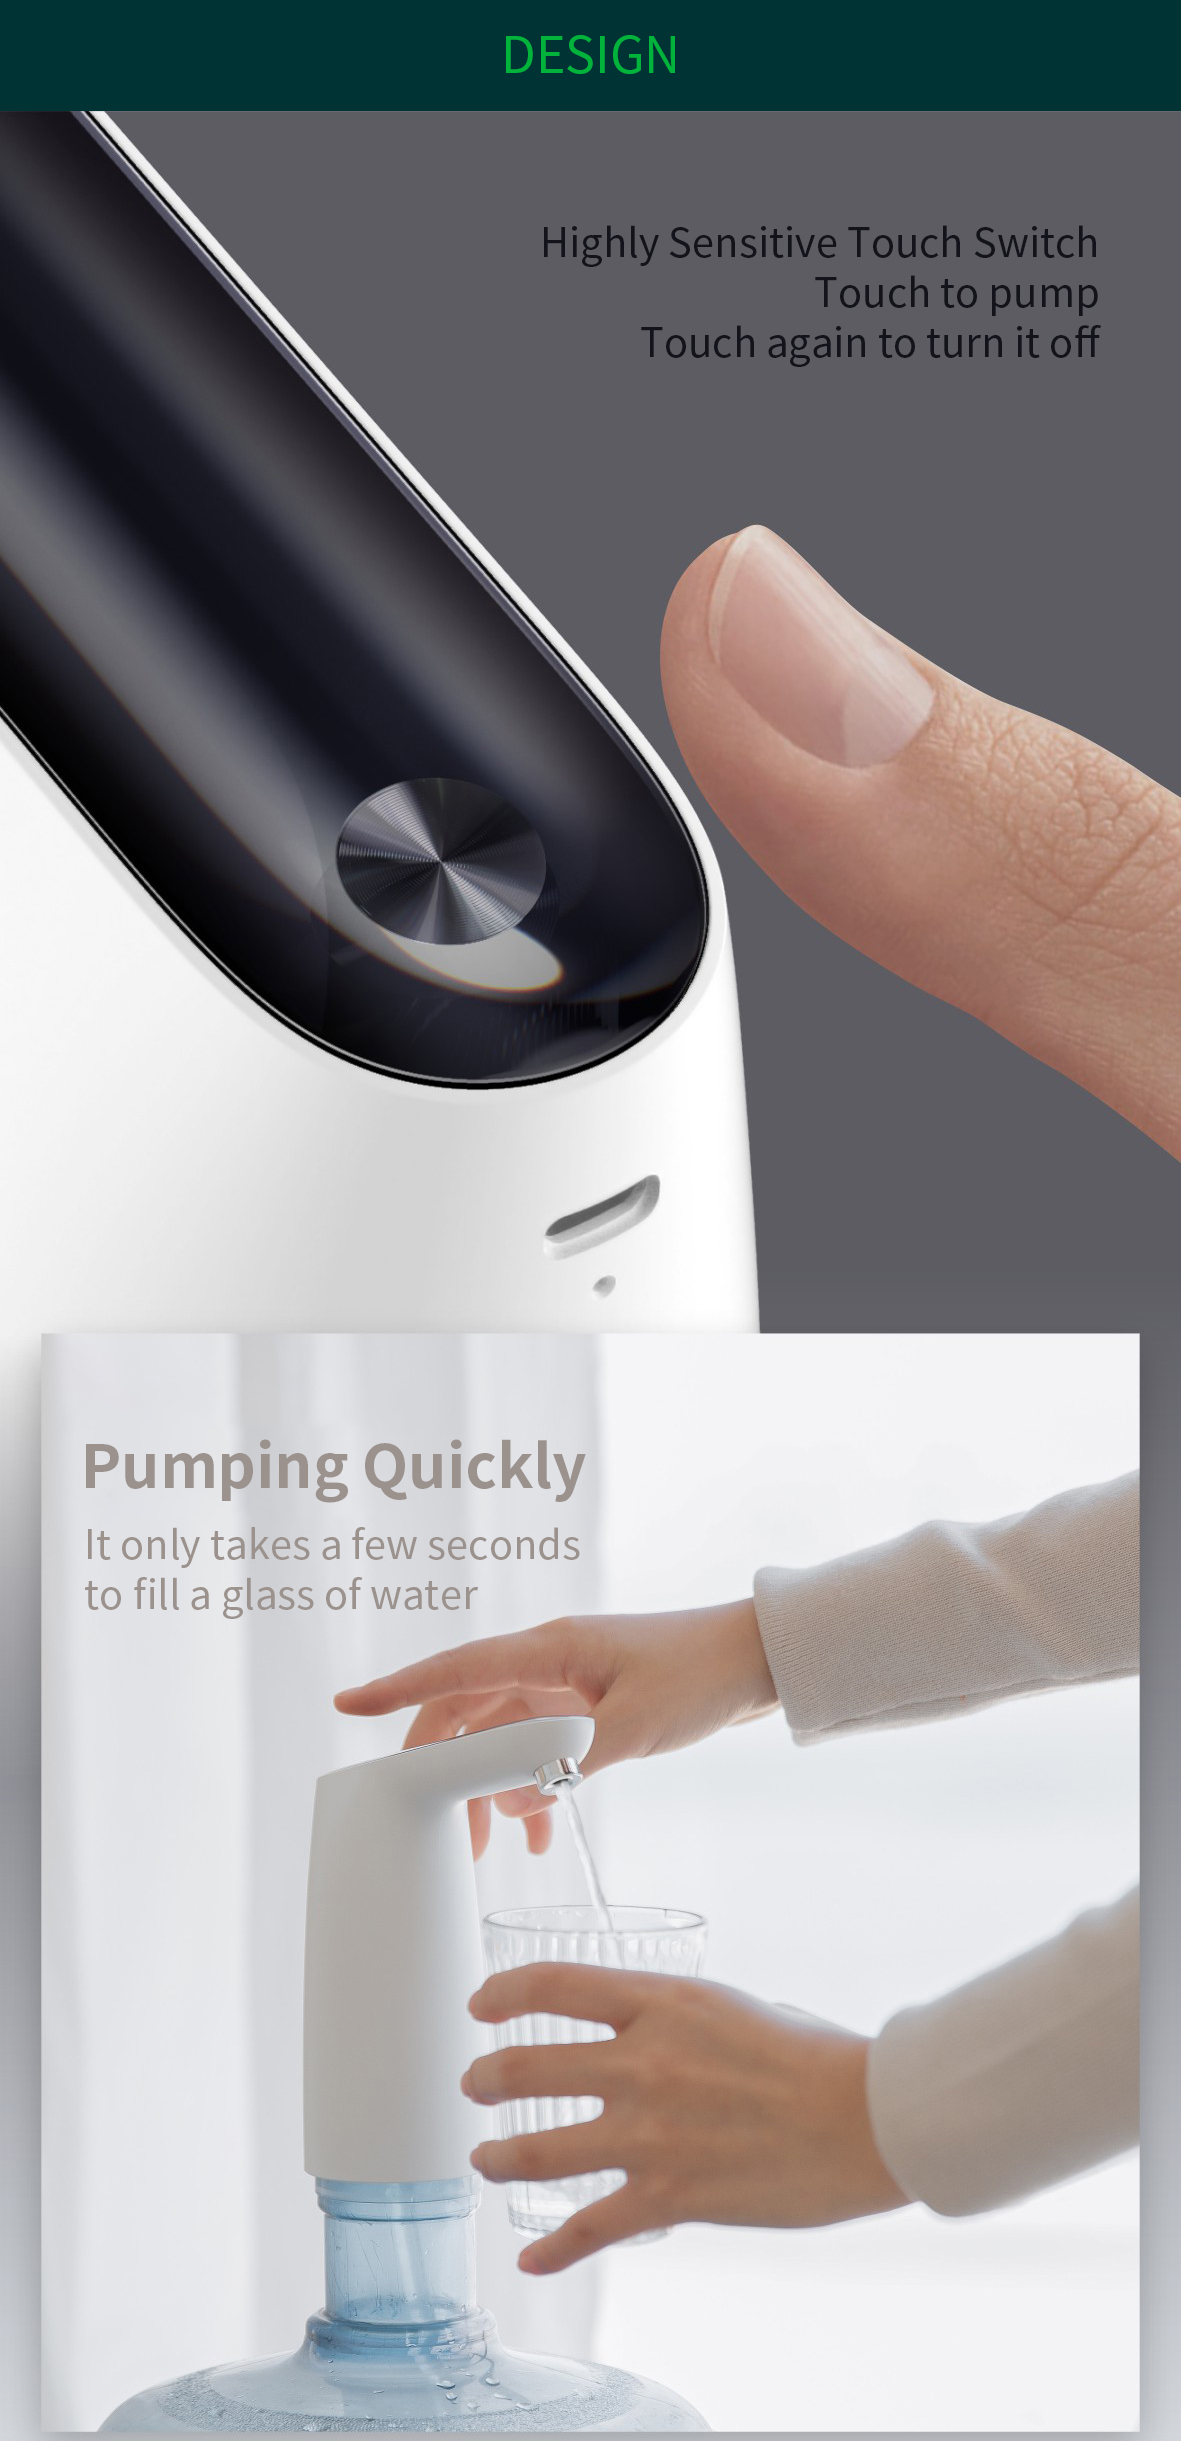 [2019 NEW] Original 3LIFE Automatic USB Mini Touch Switch Water Pump From XIAOMI Youpin Wireless Rechargeable Electric Dispenser Water Pump With USB C 12